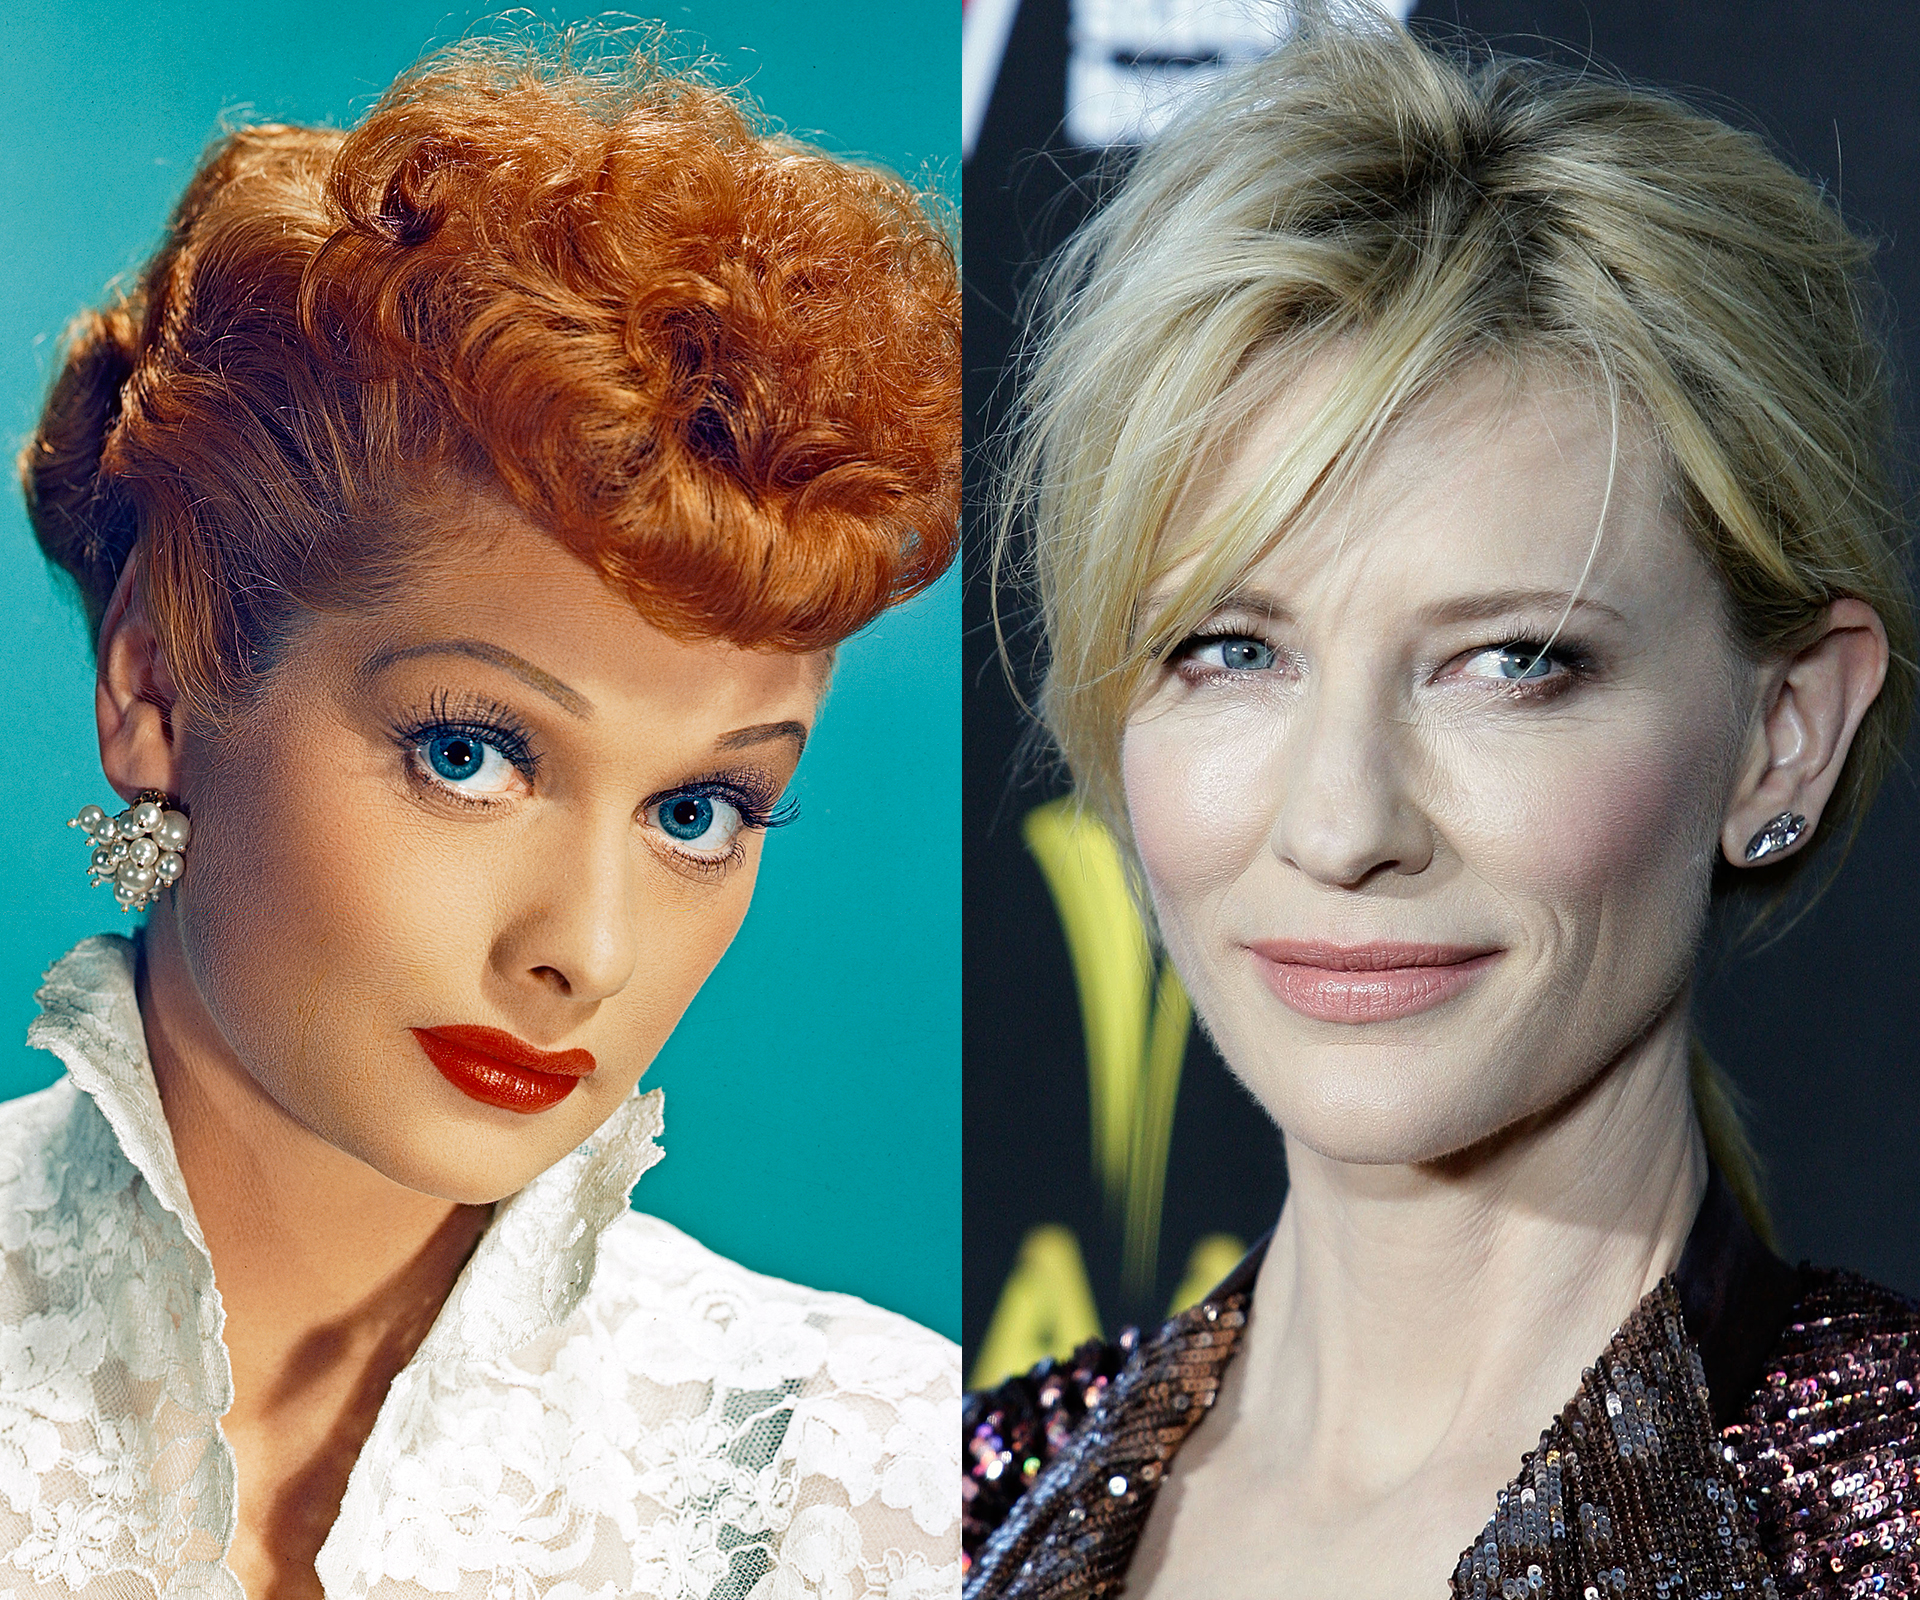 I love Cate! Cate Blanchett to play Lucille Ball in upcoming biopic